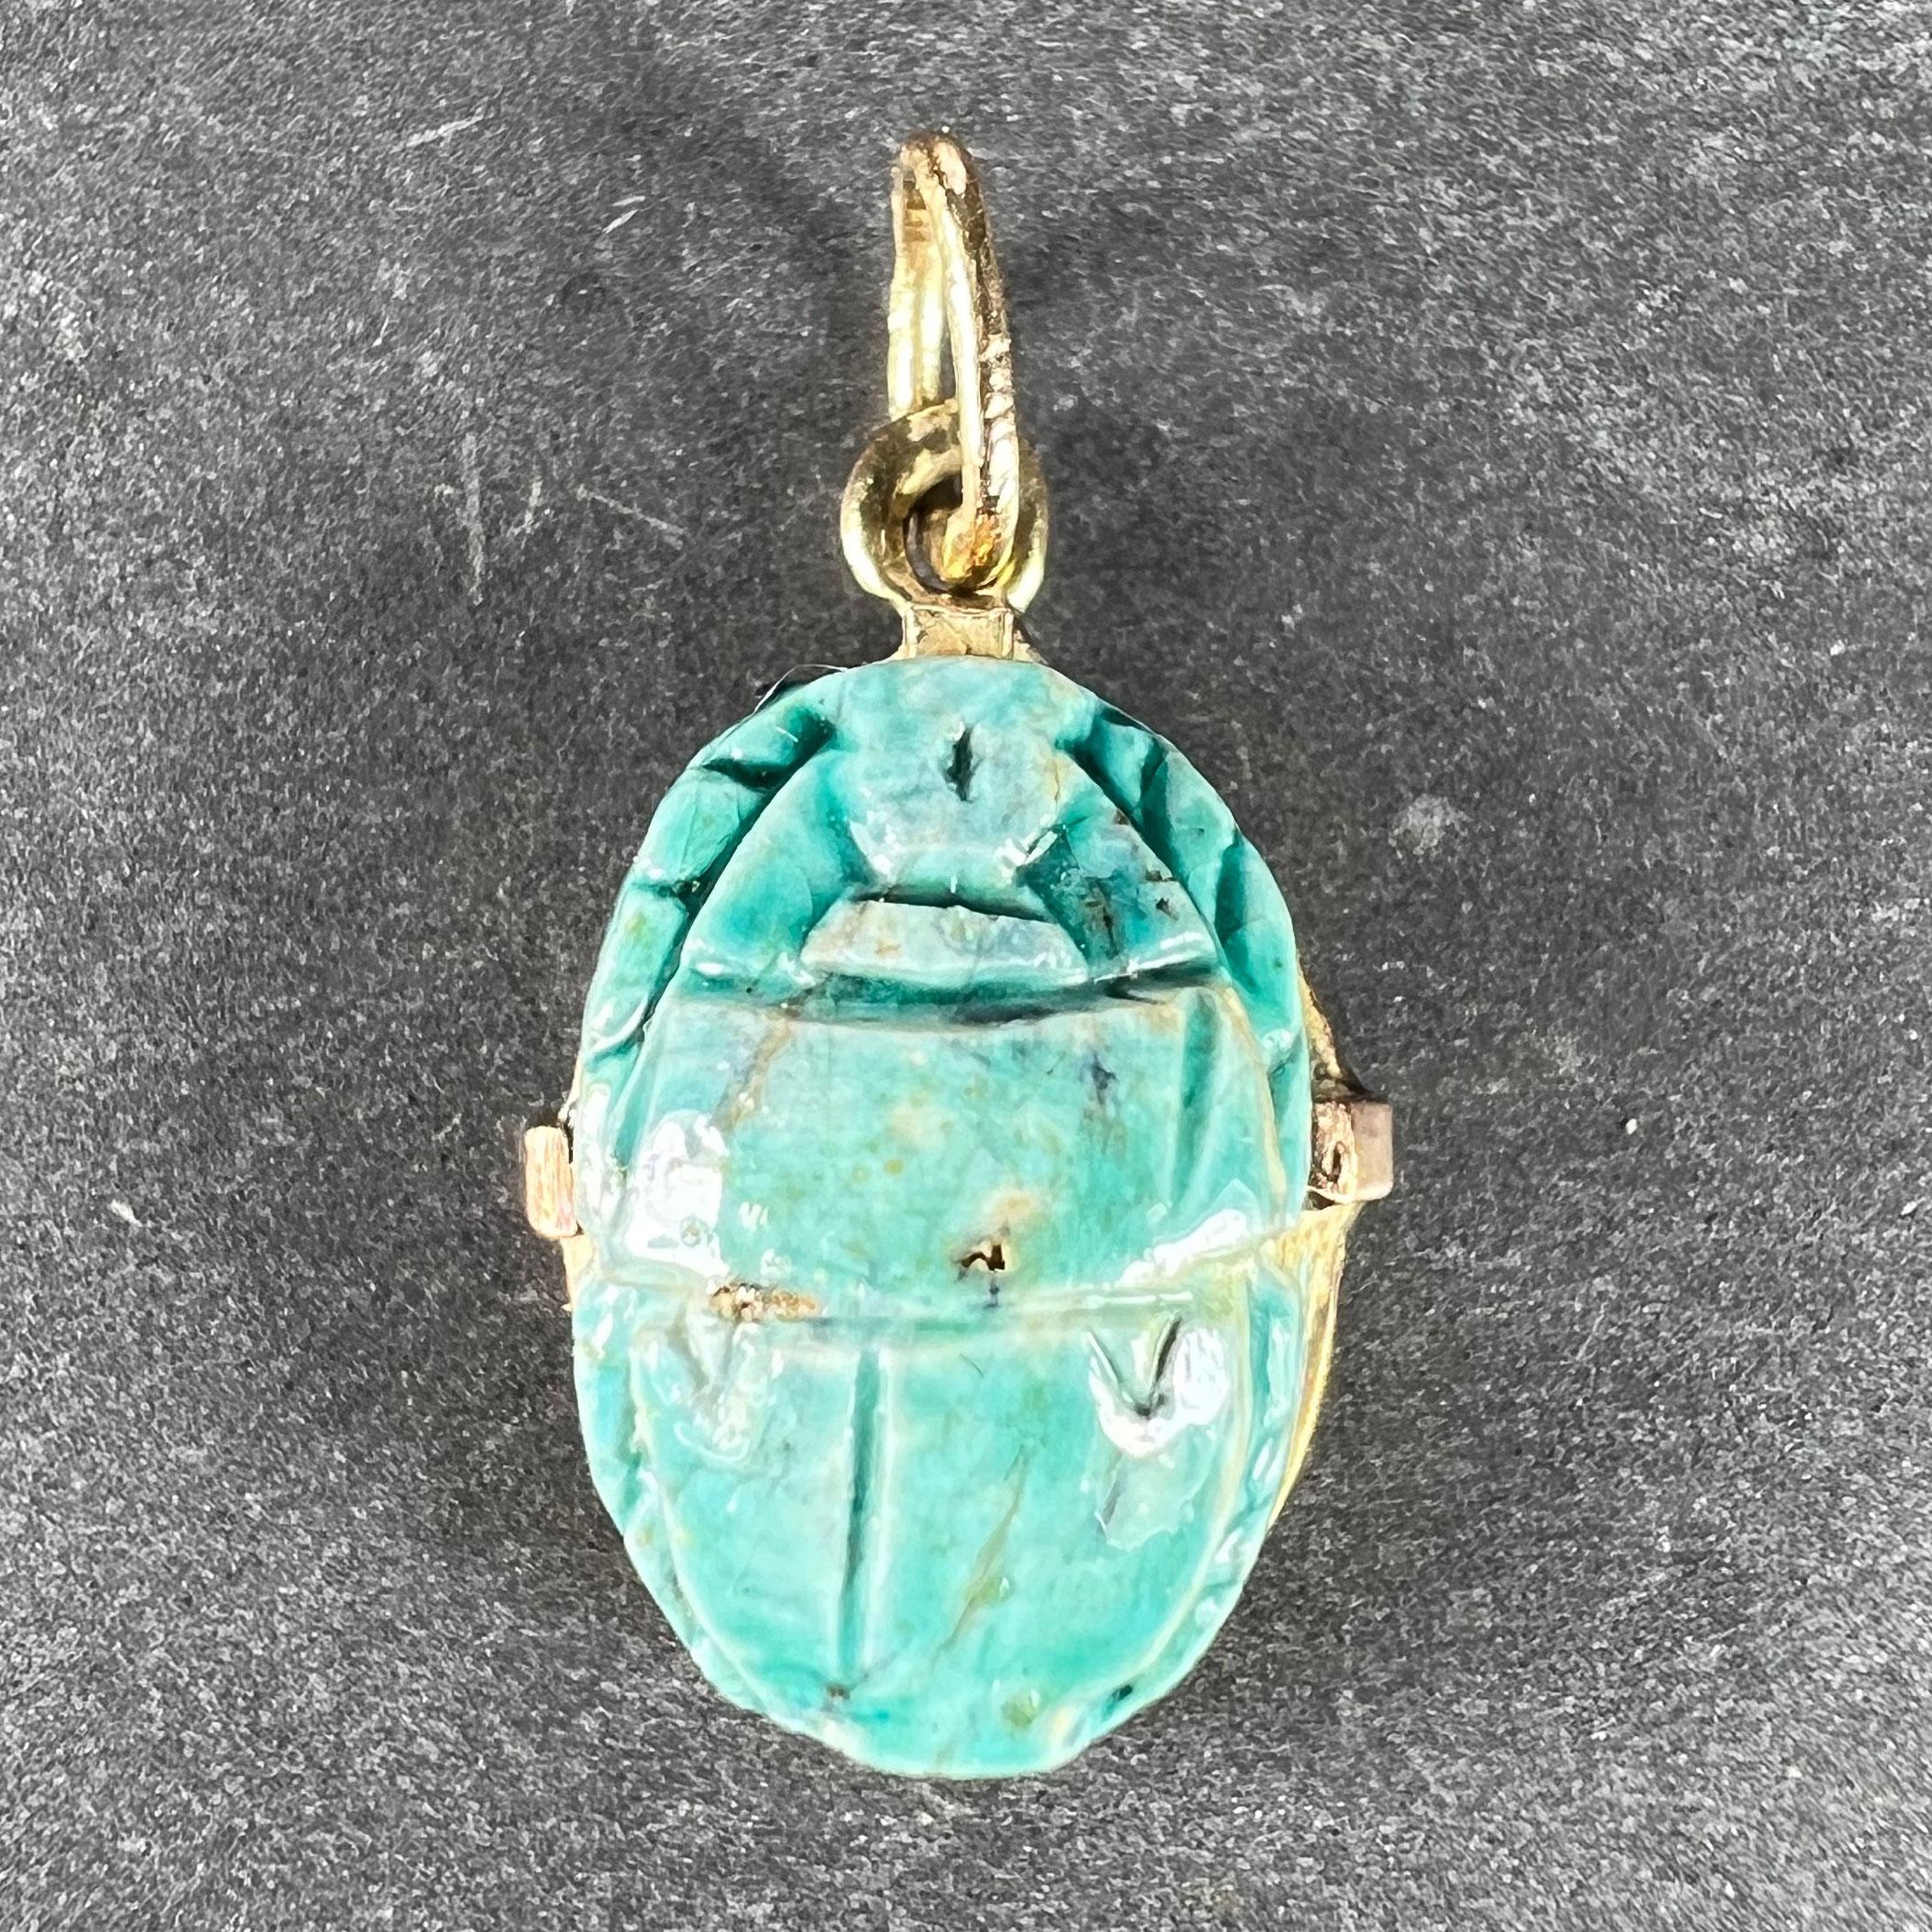 An 18 karat (18K) yellow gold charm pendant designed as the protective amulet of an Egyptian scarab in glazed blue faience on ceramic, engraved to both sides and encircled with gold wire. Unmarked but tested for 18 karat gold.
 
Dimensions: 1.8 x